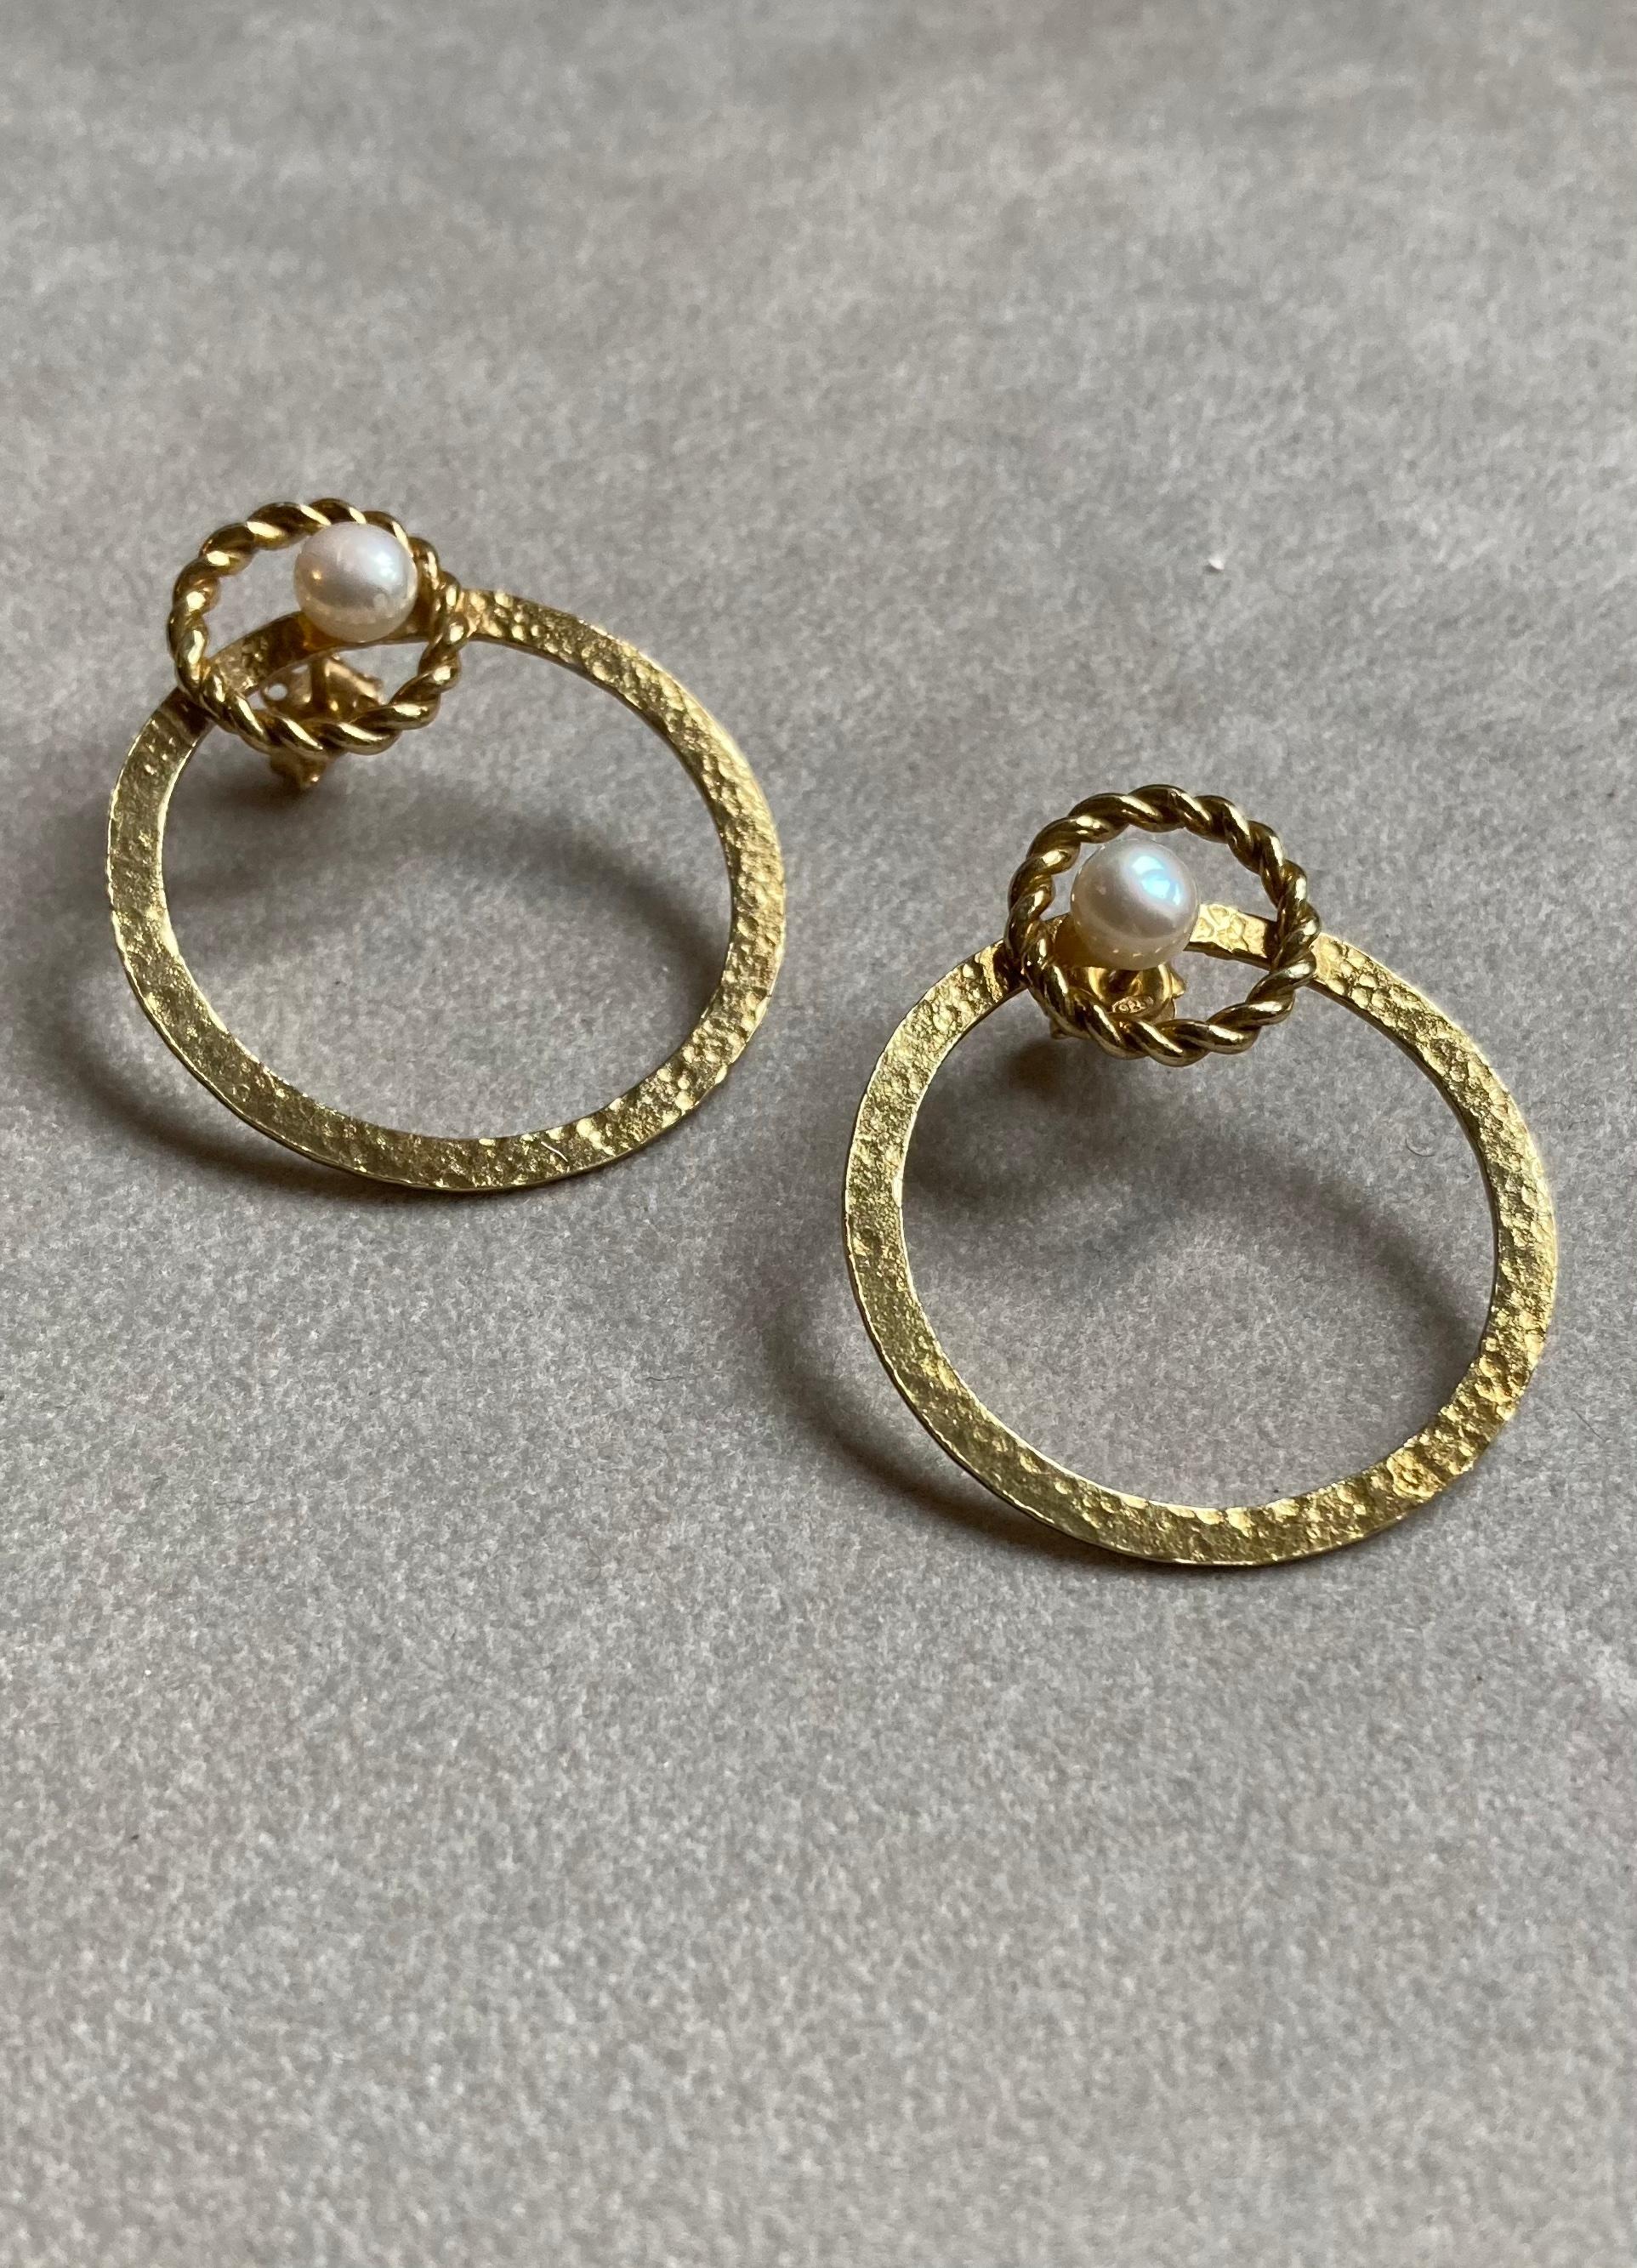 Rossella Ugolini 18K Yellow Gold Hammered Handcrafted Circle Large Hoop Earrings For Sale 6